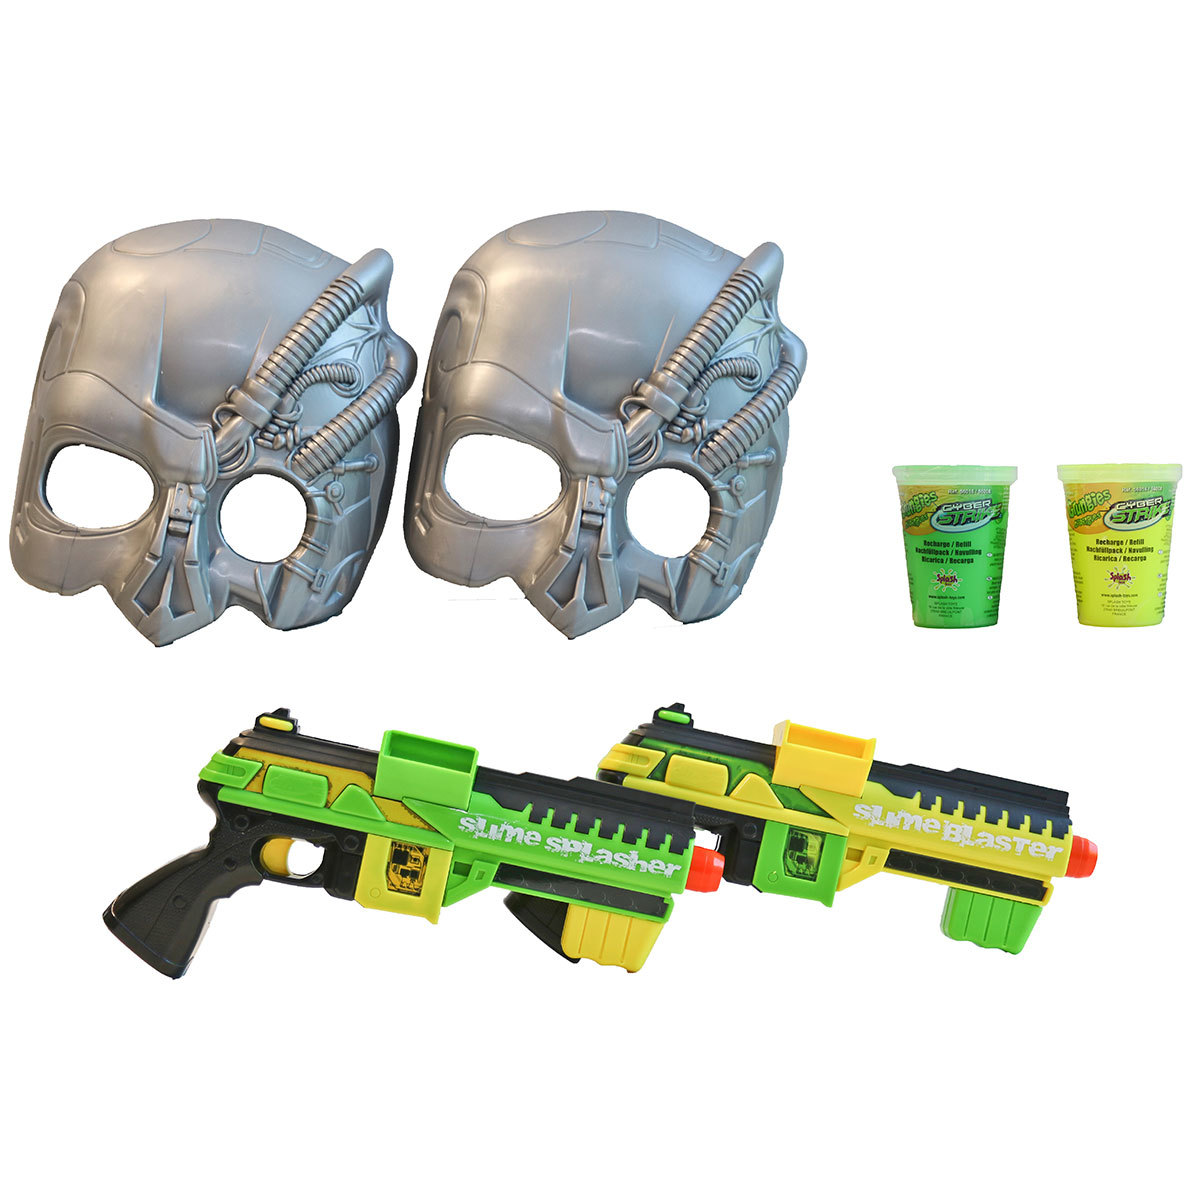 Slime Control Blaster 2 Pack With 2 Tubs Of Slime